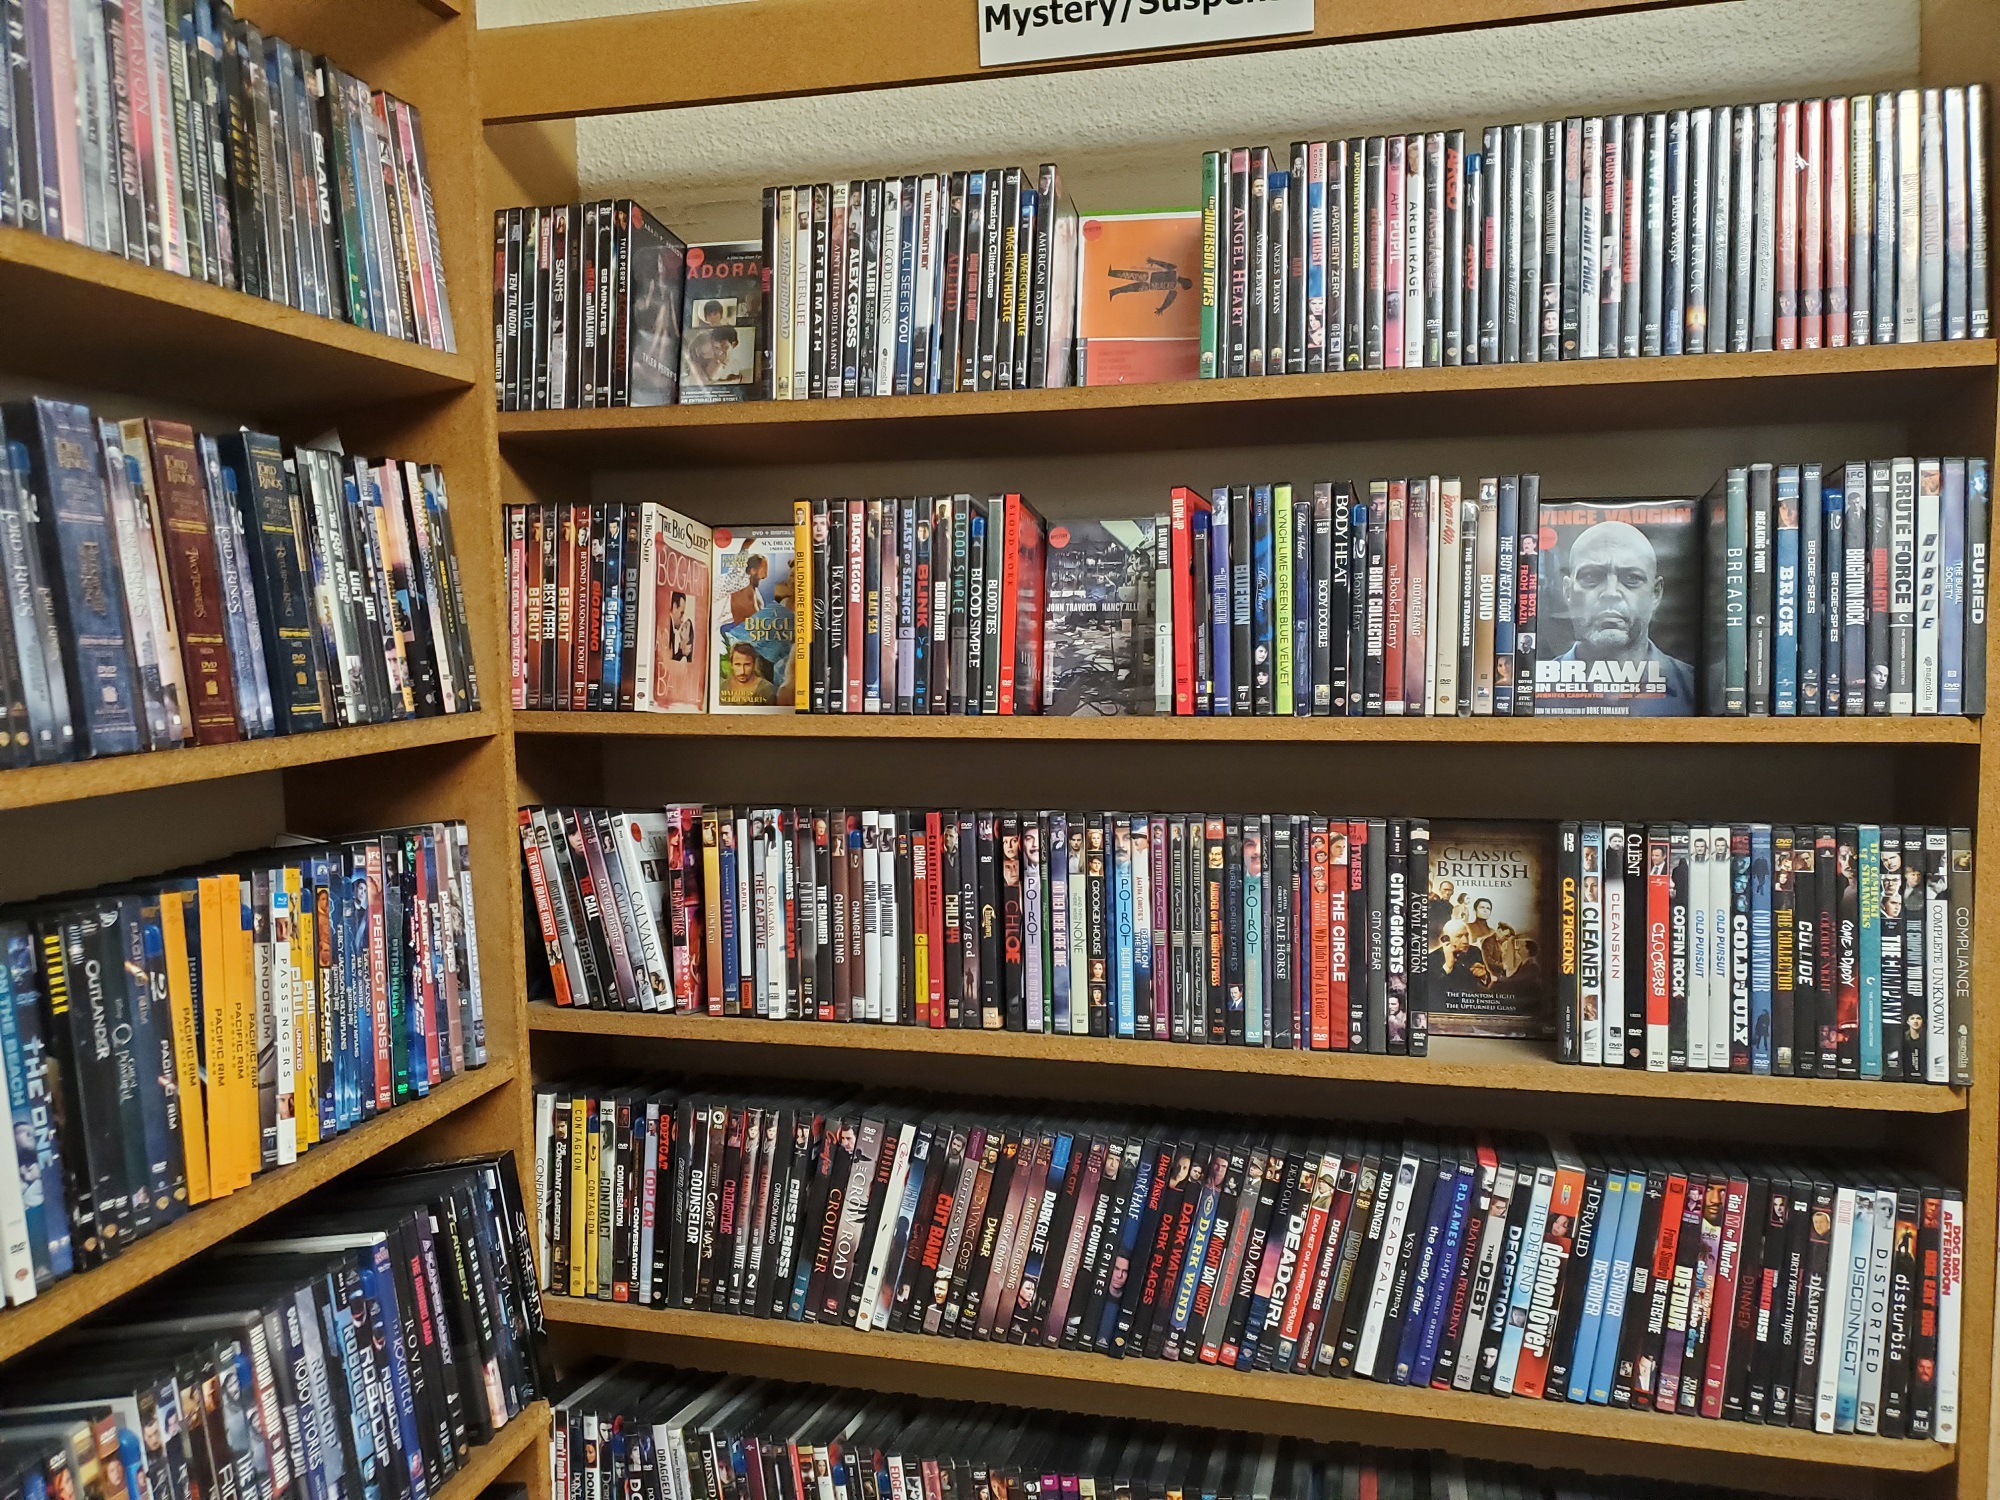 The "Mystery/Suspense" section at Four Star Video Cooperative in Madison, one of the remaining video rental stores in the state. (Photo by Andy Turner)